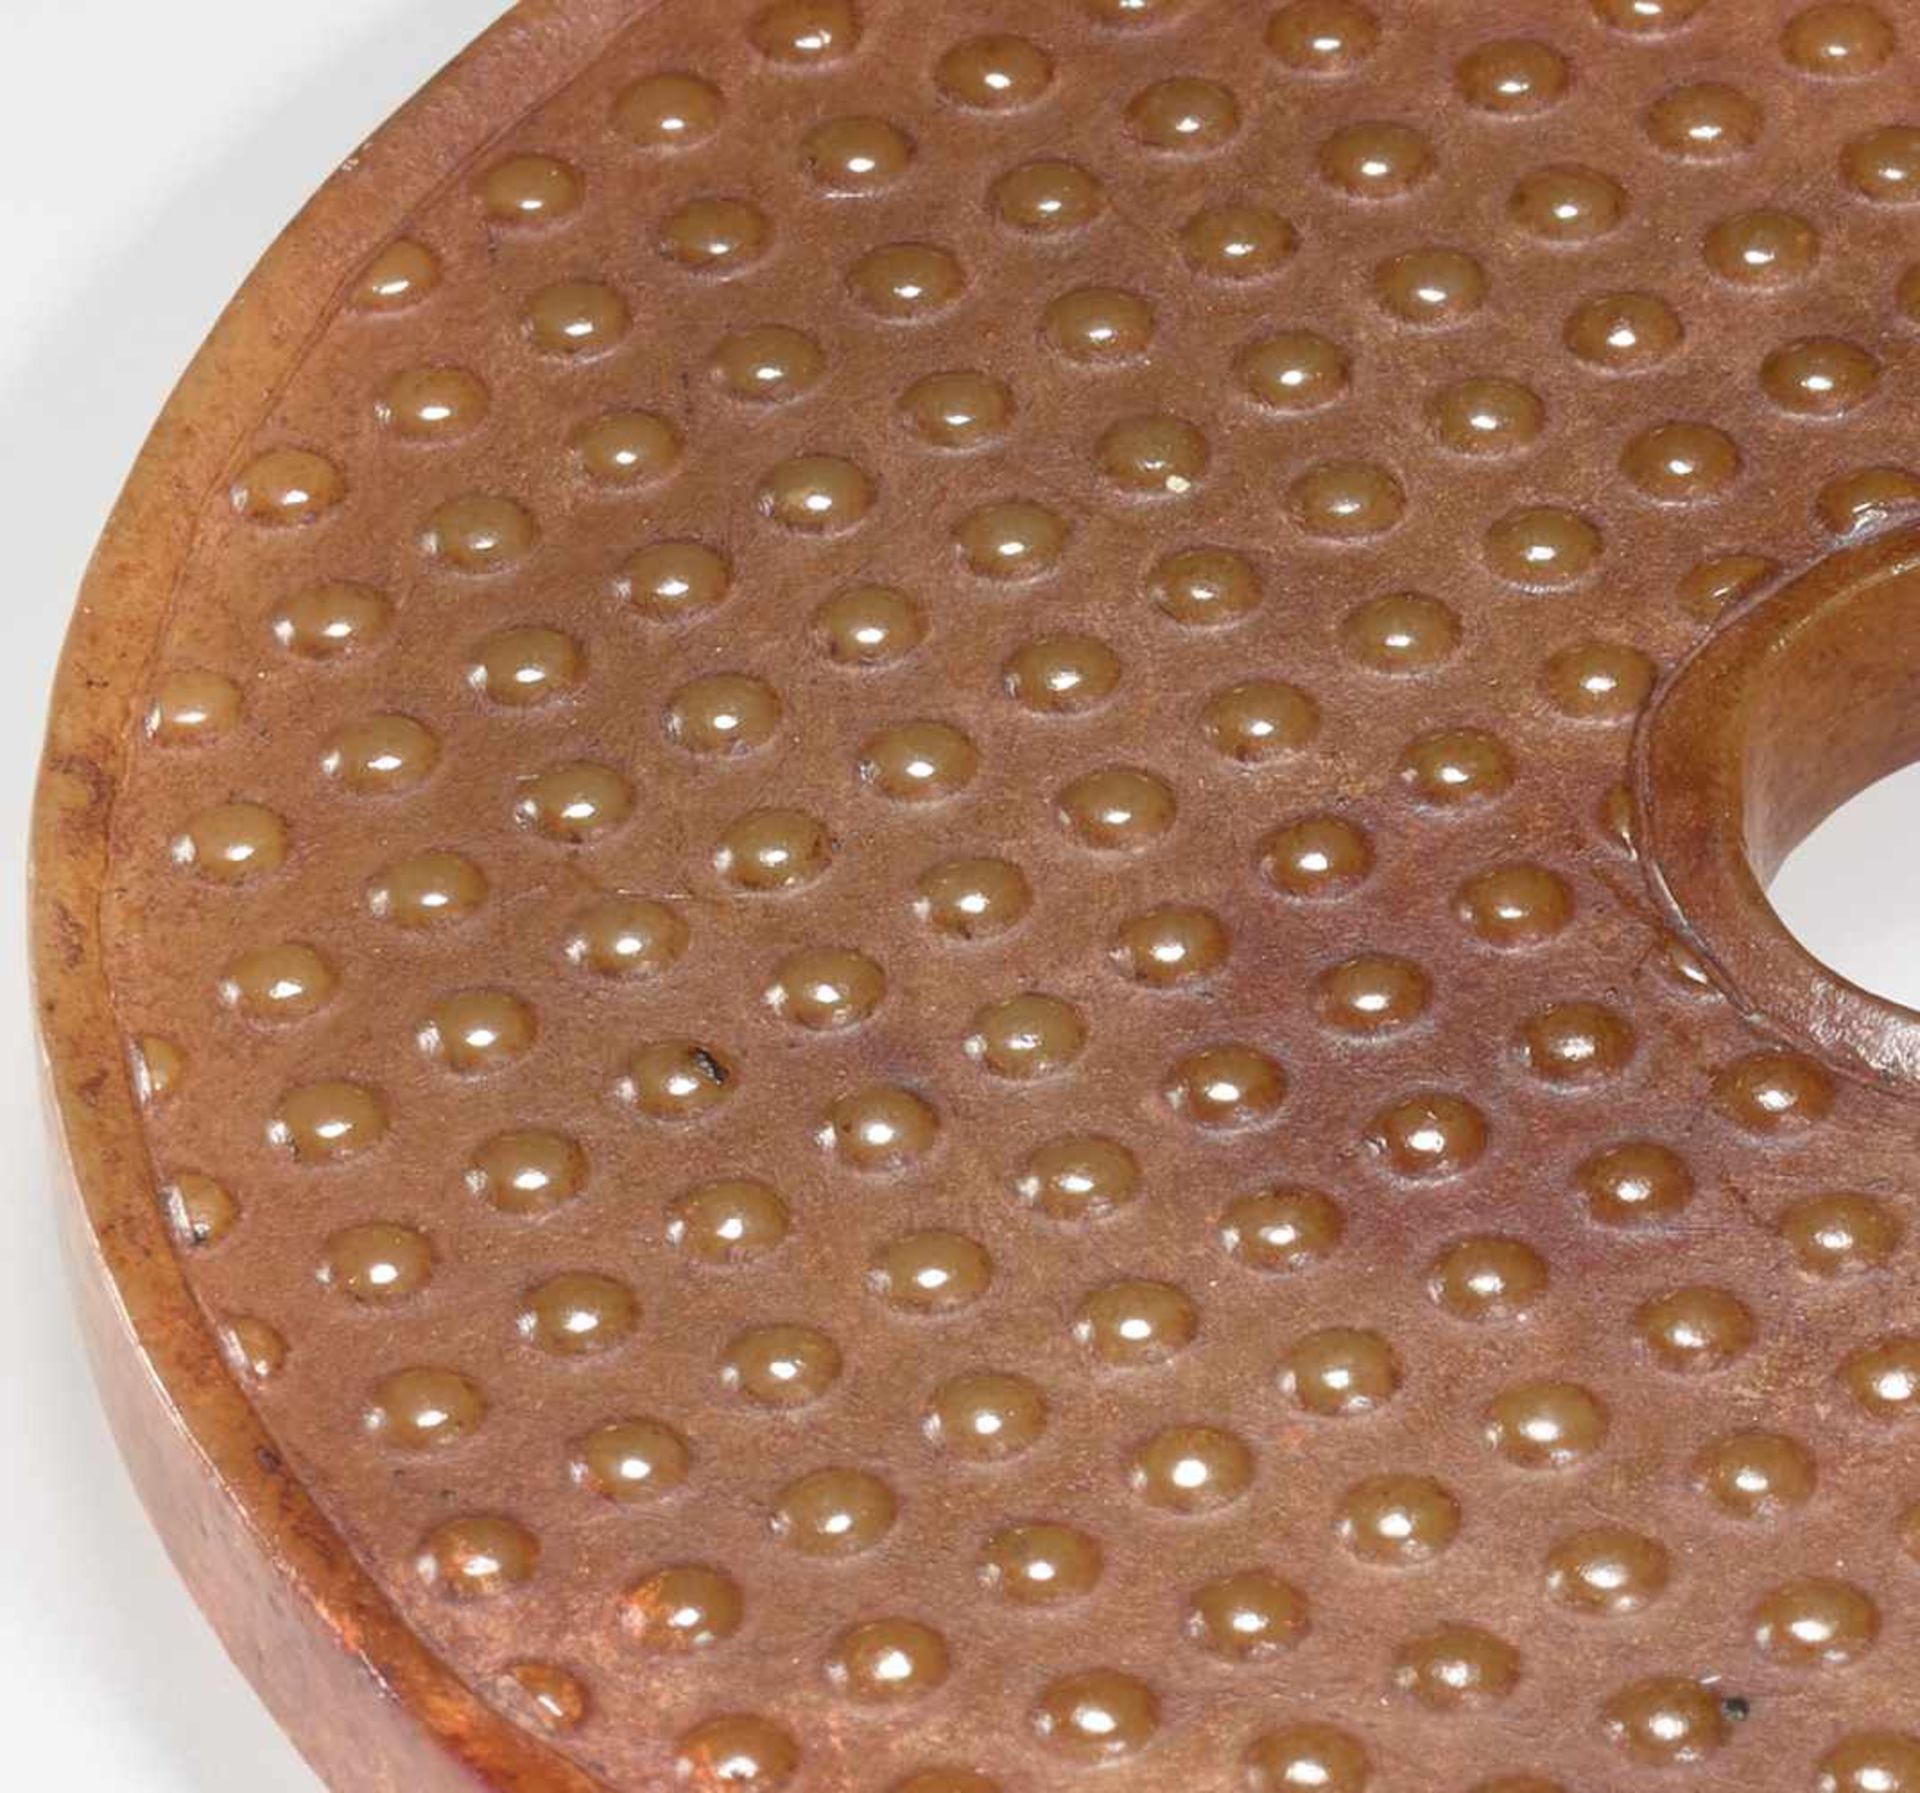 AN ATTRACTIVE AMBER COLOURED BI DISC WITH A PATTERN OF RAISED BOSSES Jade. China, Han Dynasty, 2nd - - Image 6 of 8